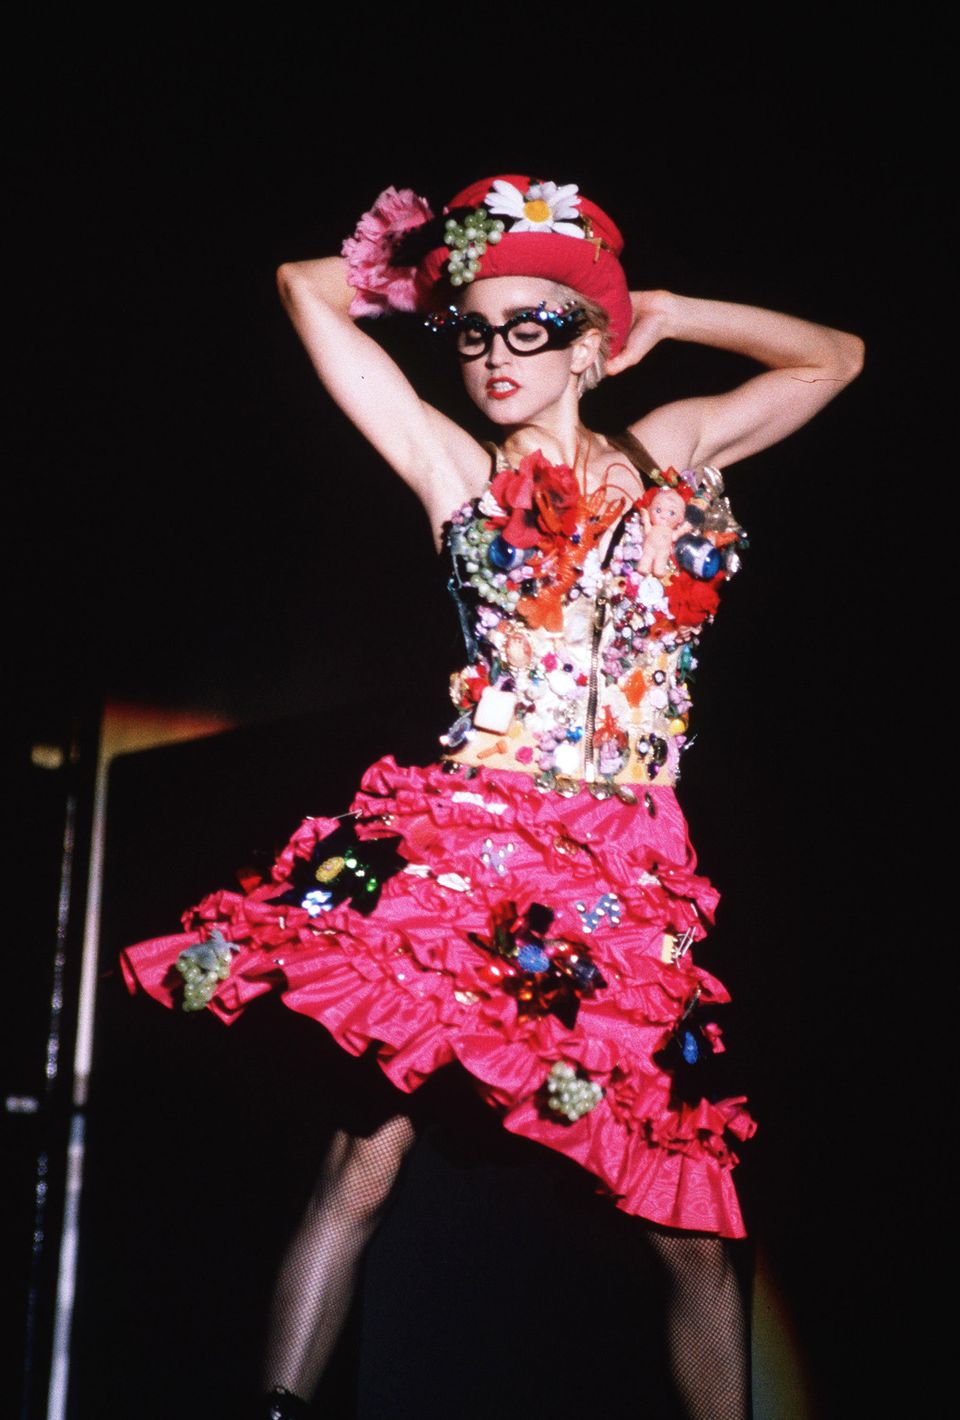 60 Of Madonna's Most Iconic Fashion Moments Through The Years ...